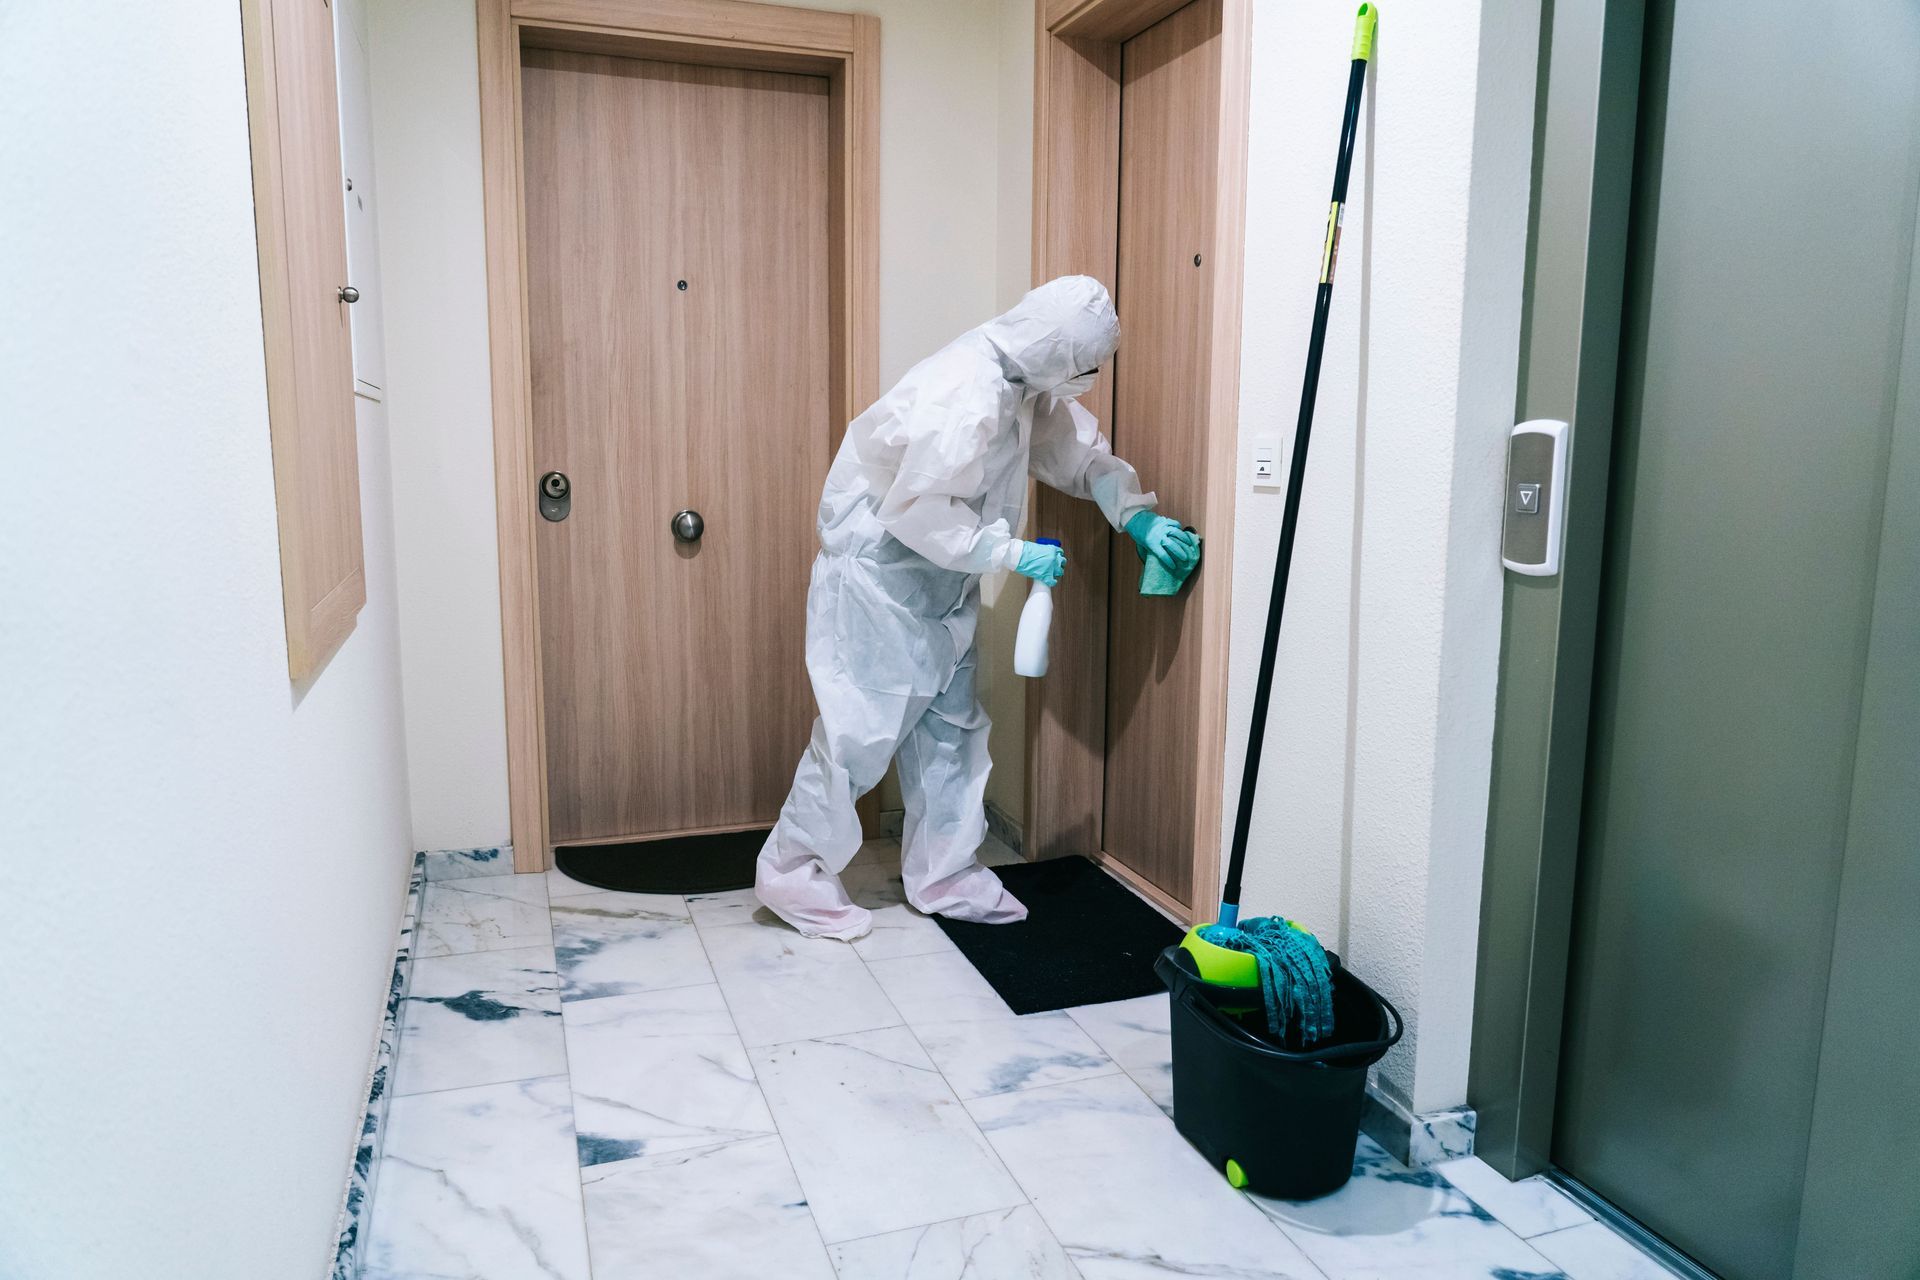 a person in a protective suit is cleaning a door